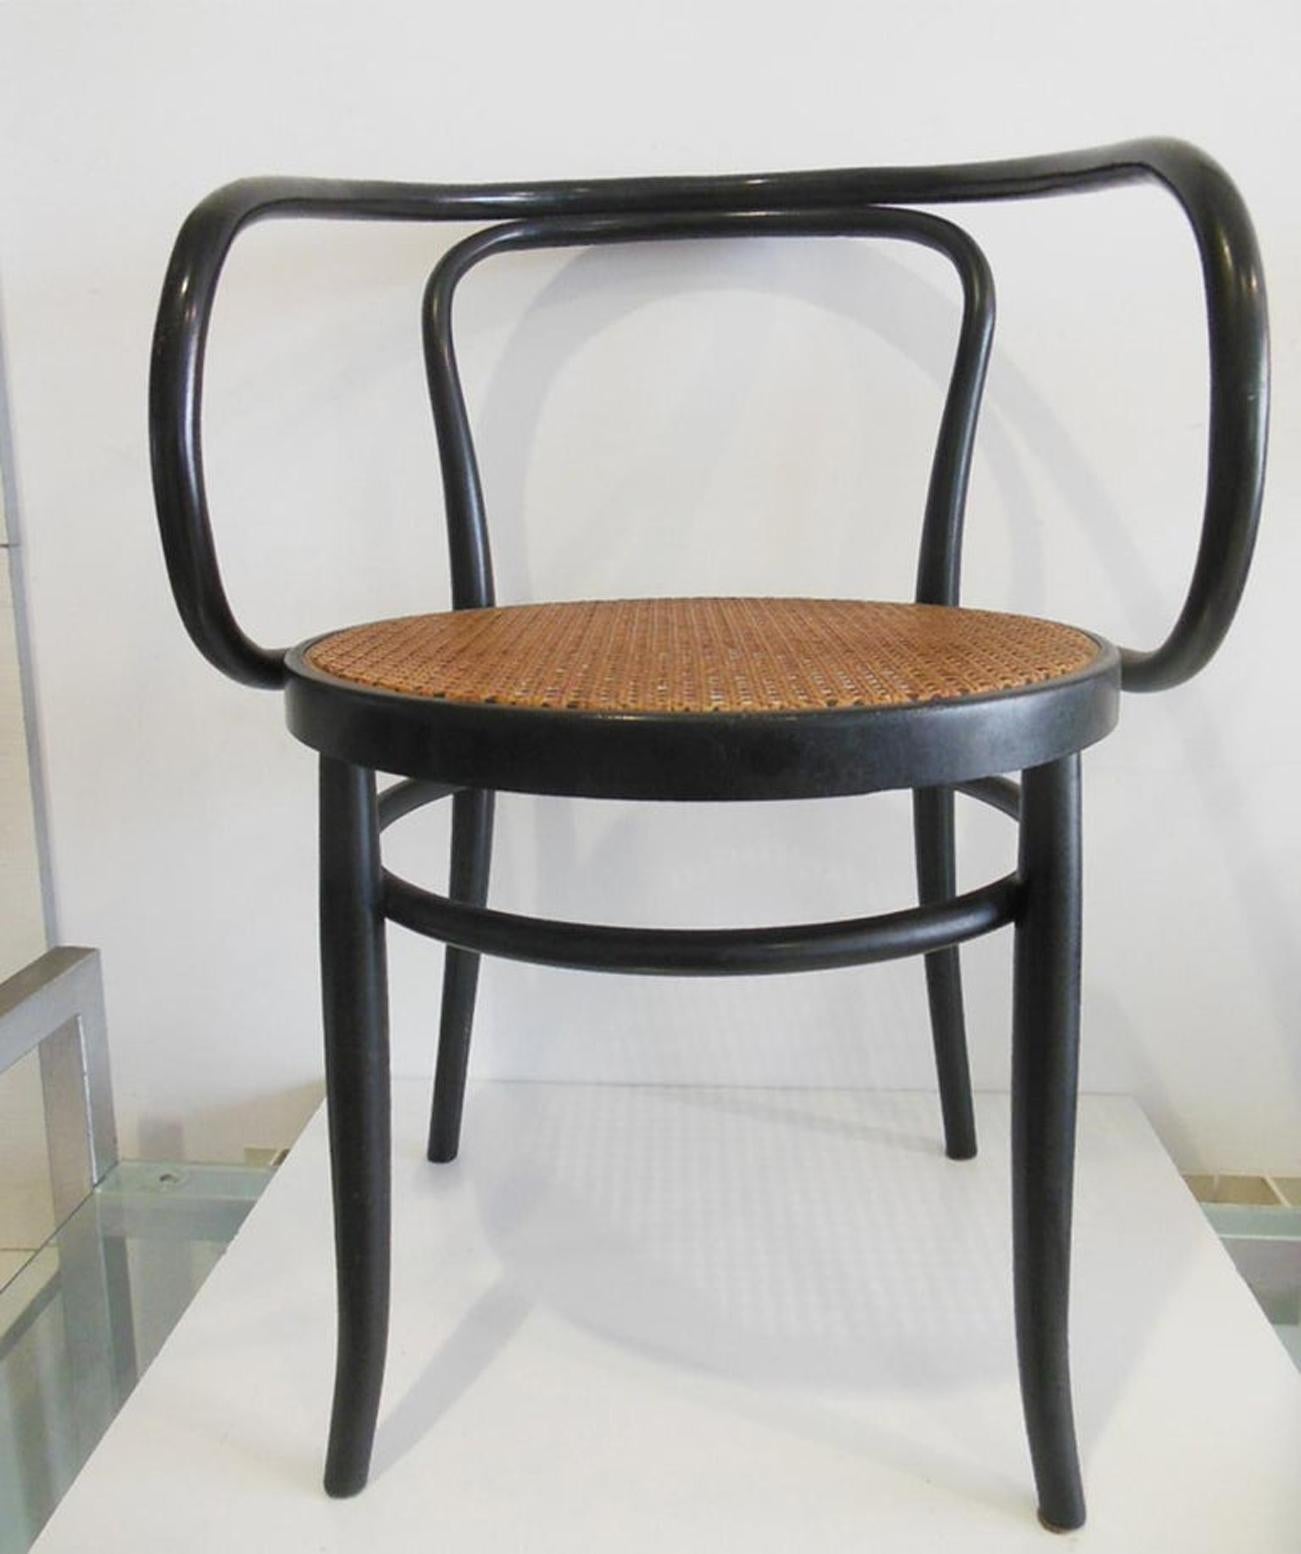 Lacquered Midcentury Chair After Thonet 209, Black  Bentwood , 1950s